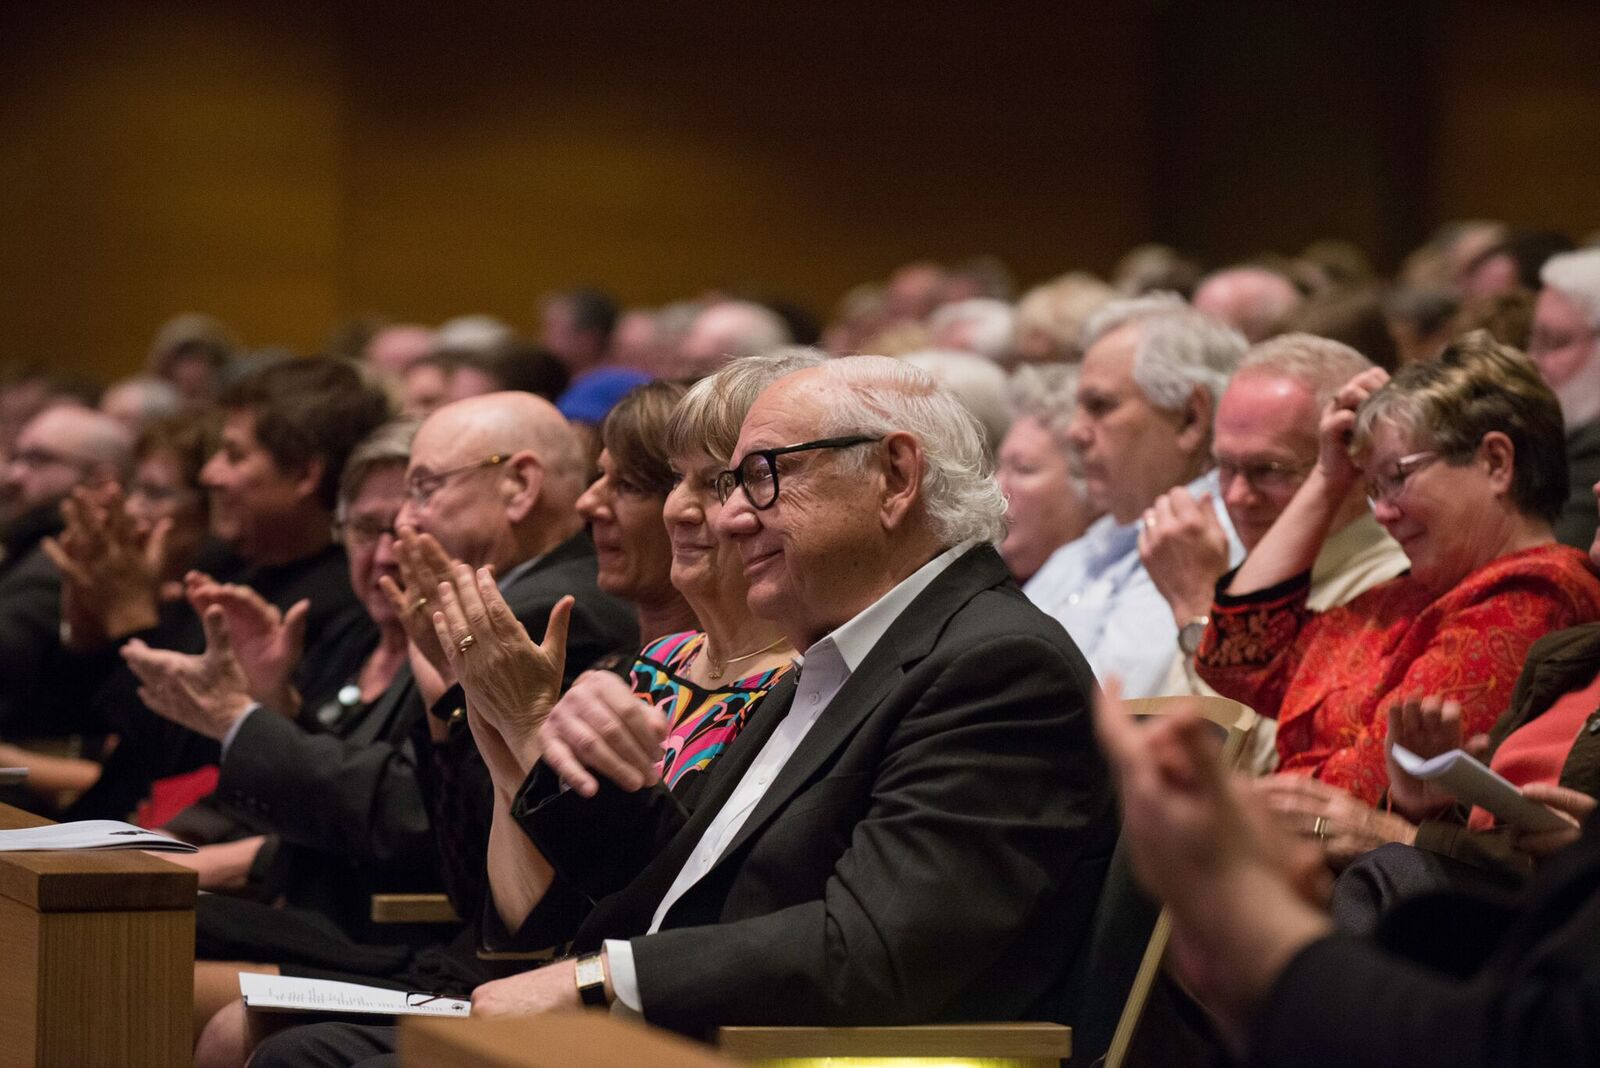 Dominick Argento in the audience for a performance in 2014. (Photo by Bruce Silcox, courtesy of VocalEssence and Boosey & Hawkes)